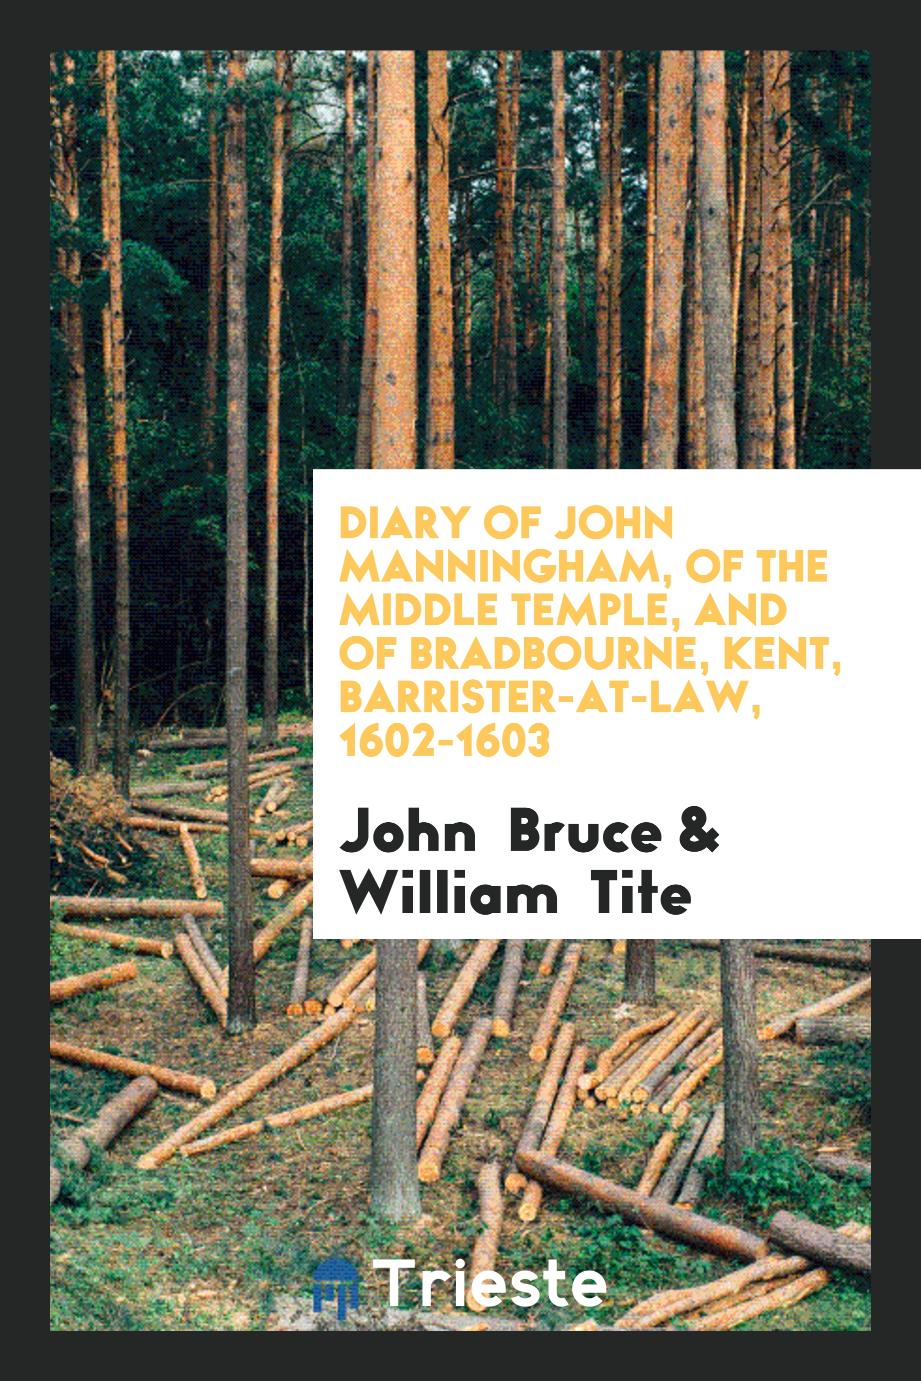 John  Bruce, William Tite - Diary of John Manningham, of the Middle Temple, and of Bradbourne, Kent, Barrister-At-Law, 1602-1603